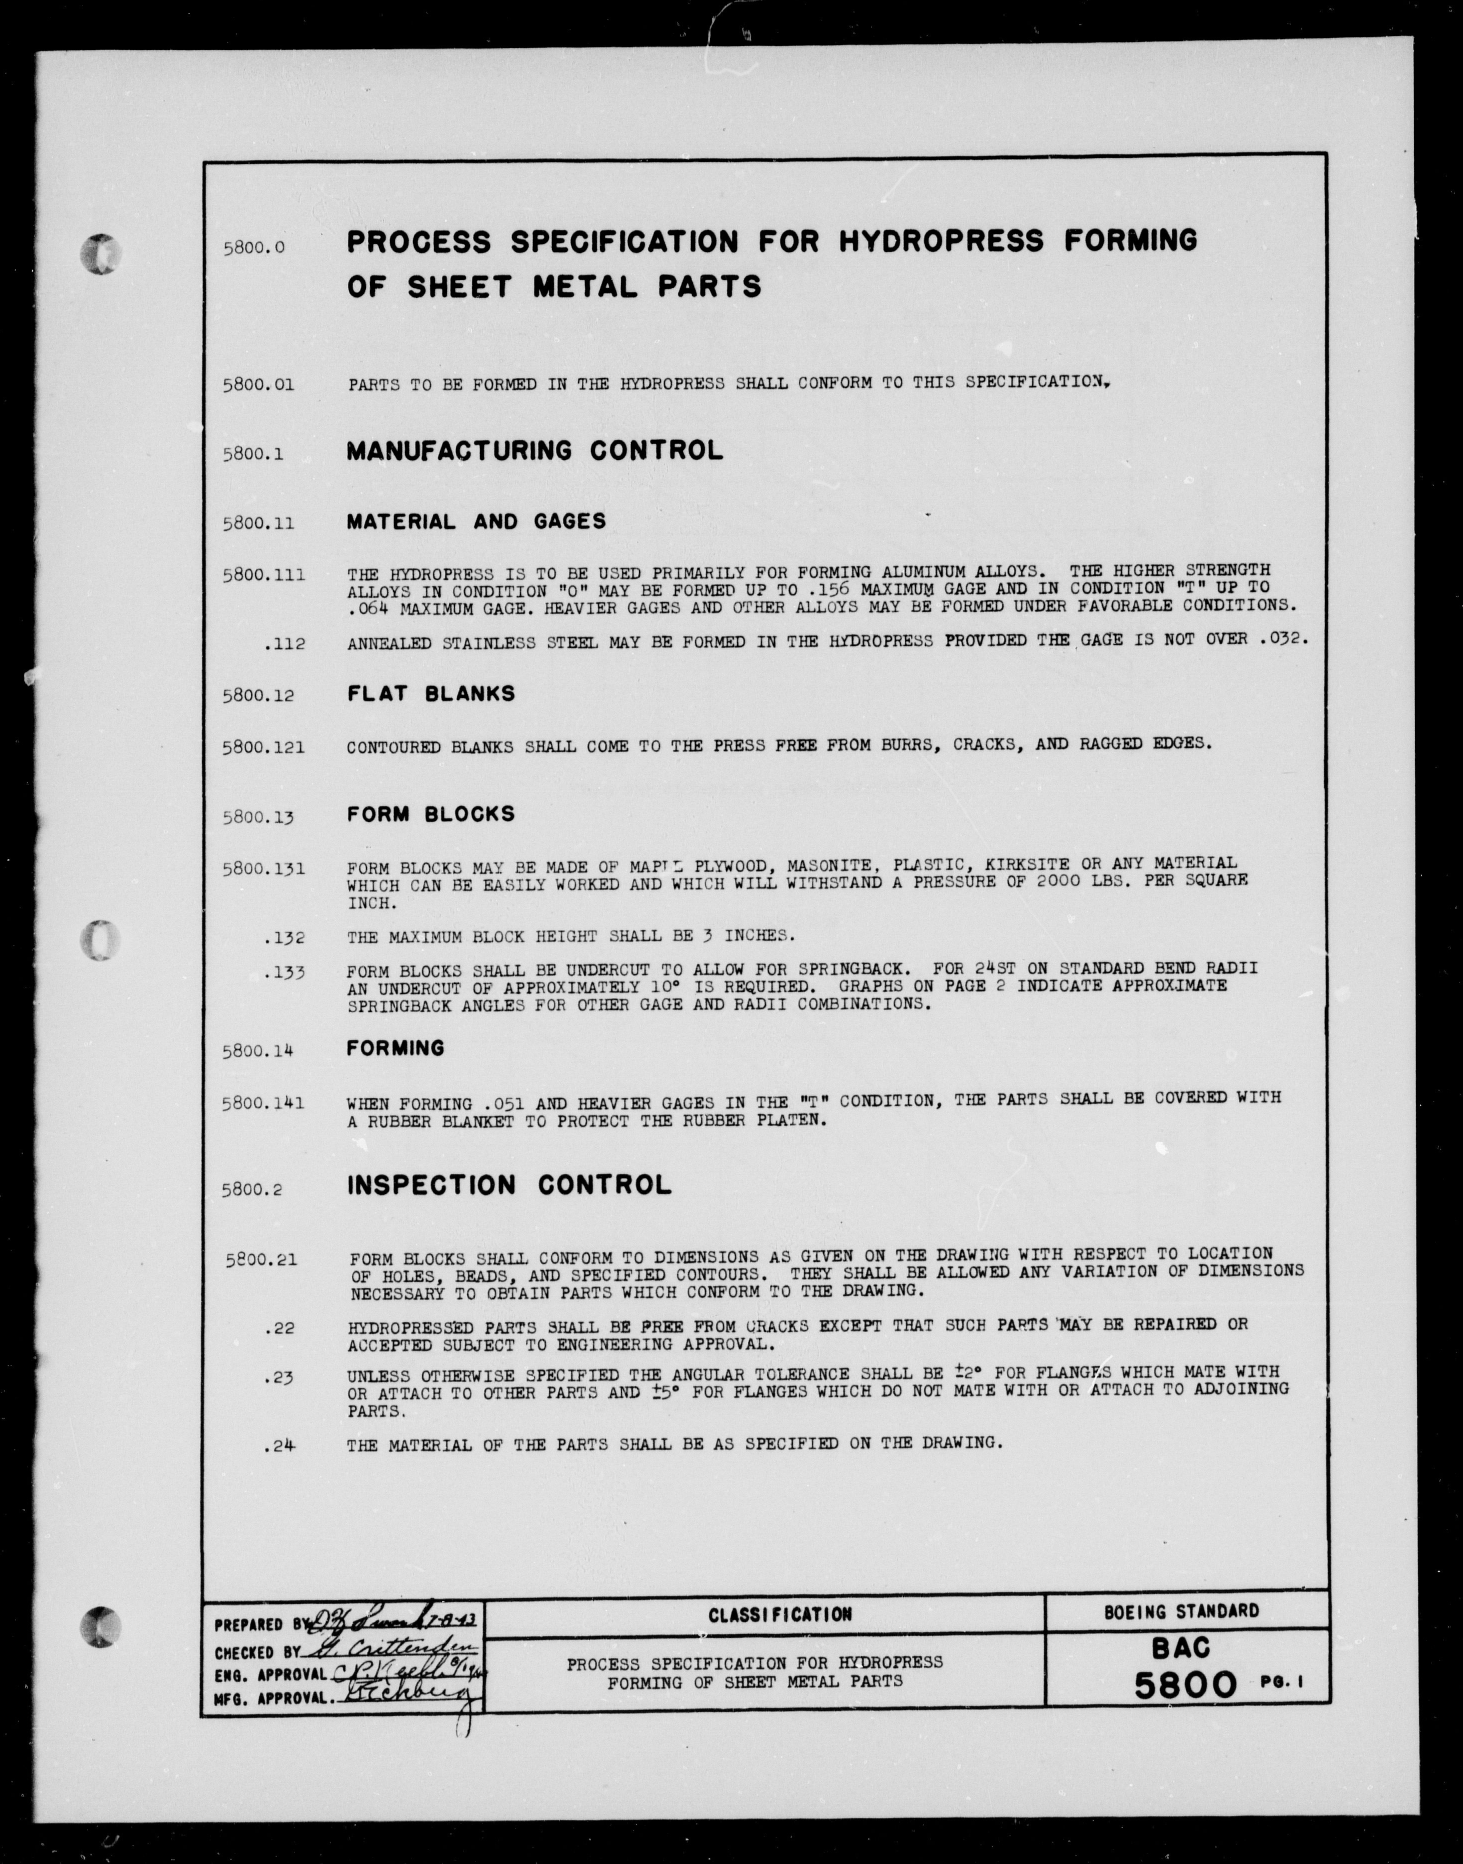 Sample page 1 from AirCorps Library document: Hydropress Forming of Sheet Metal Parts